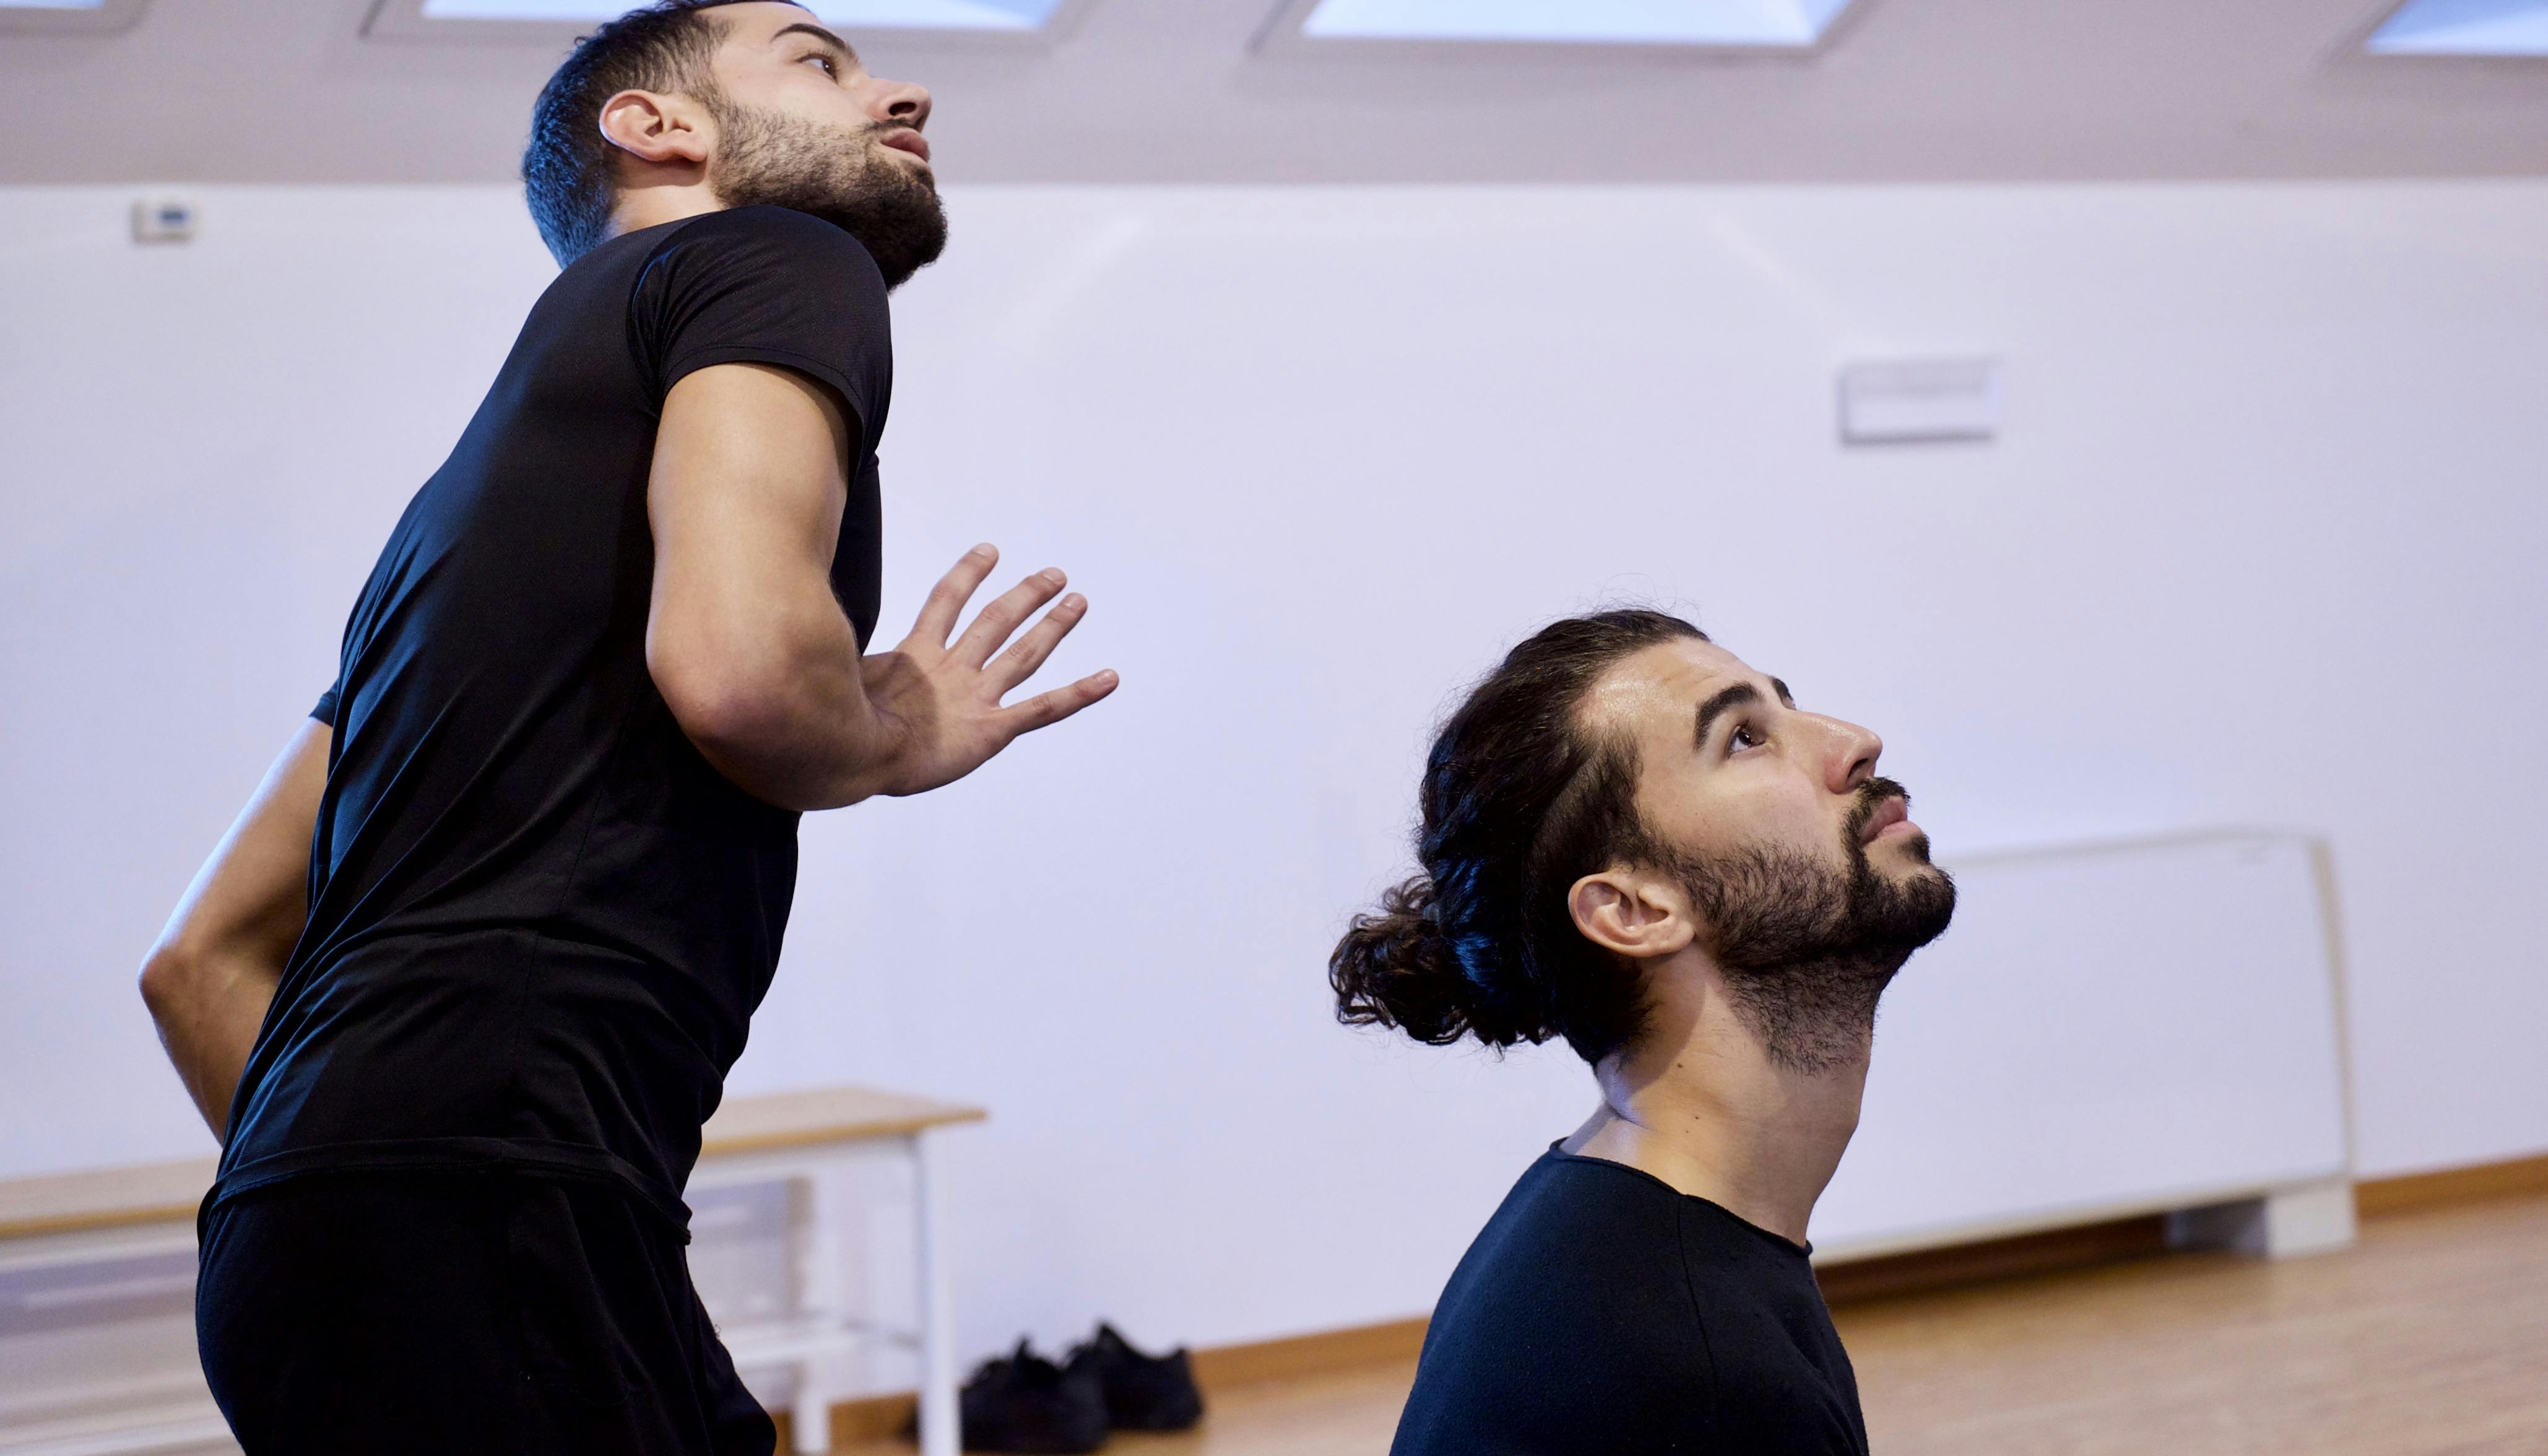 Rehearsal in the Studio. The two dancers are looking slightly upwards. They are in suits, we can see the whole upper part of one's body, only the head and shoulders of the other.